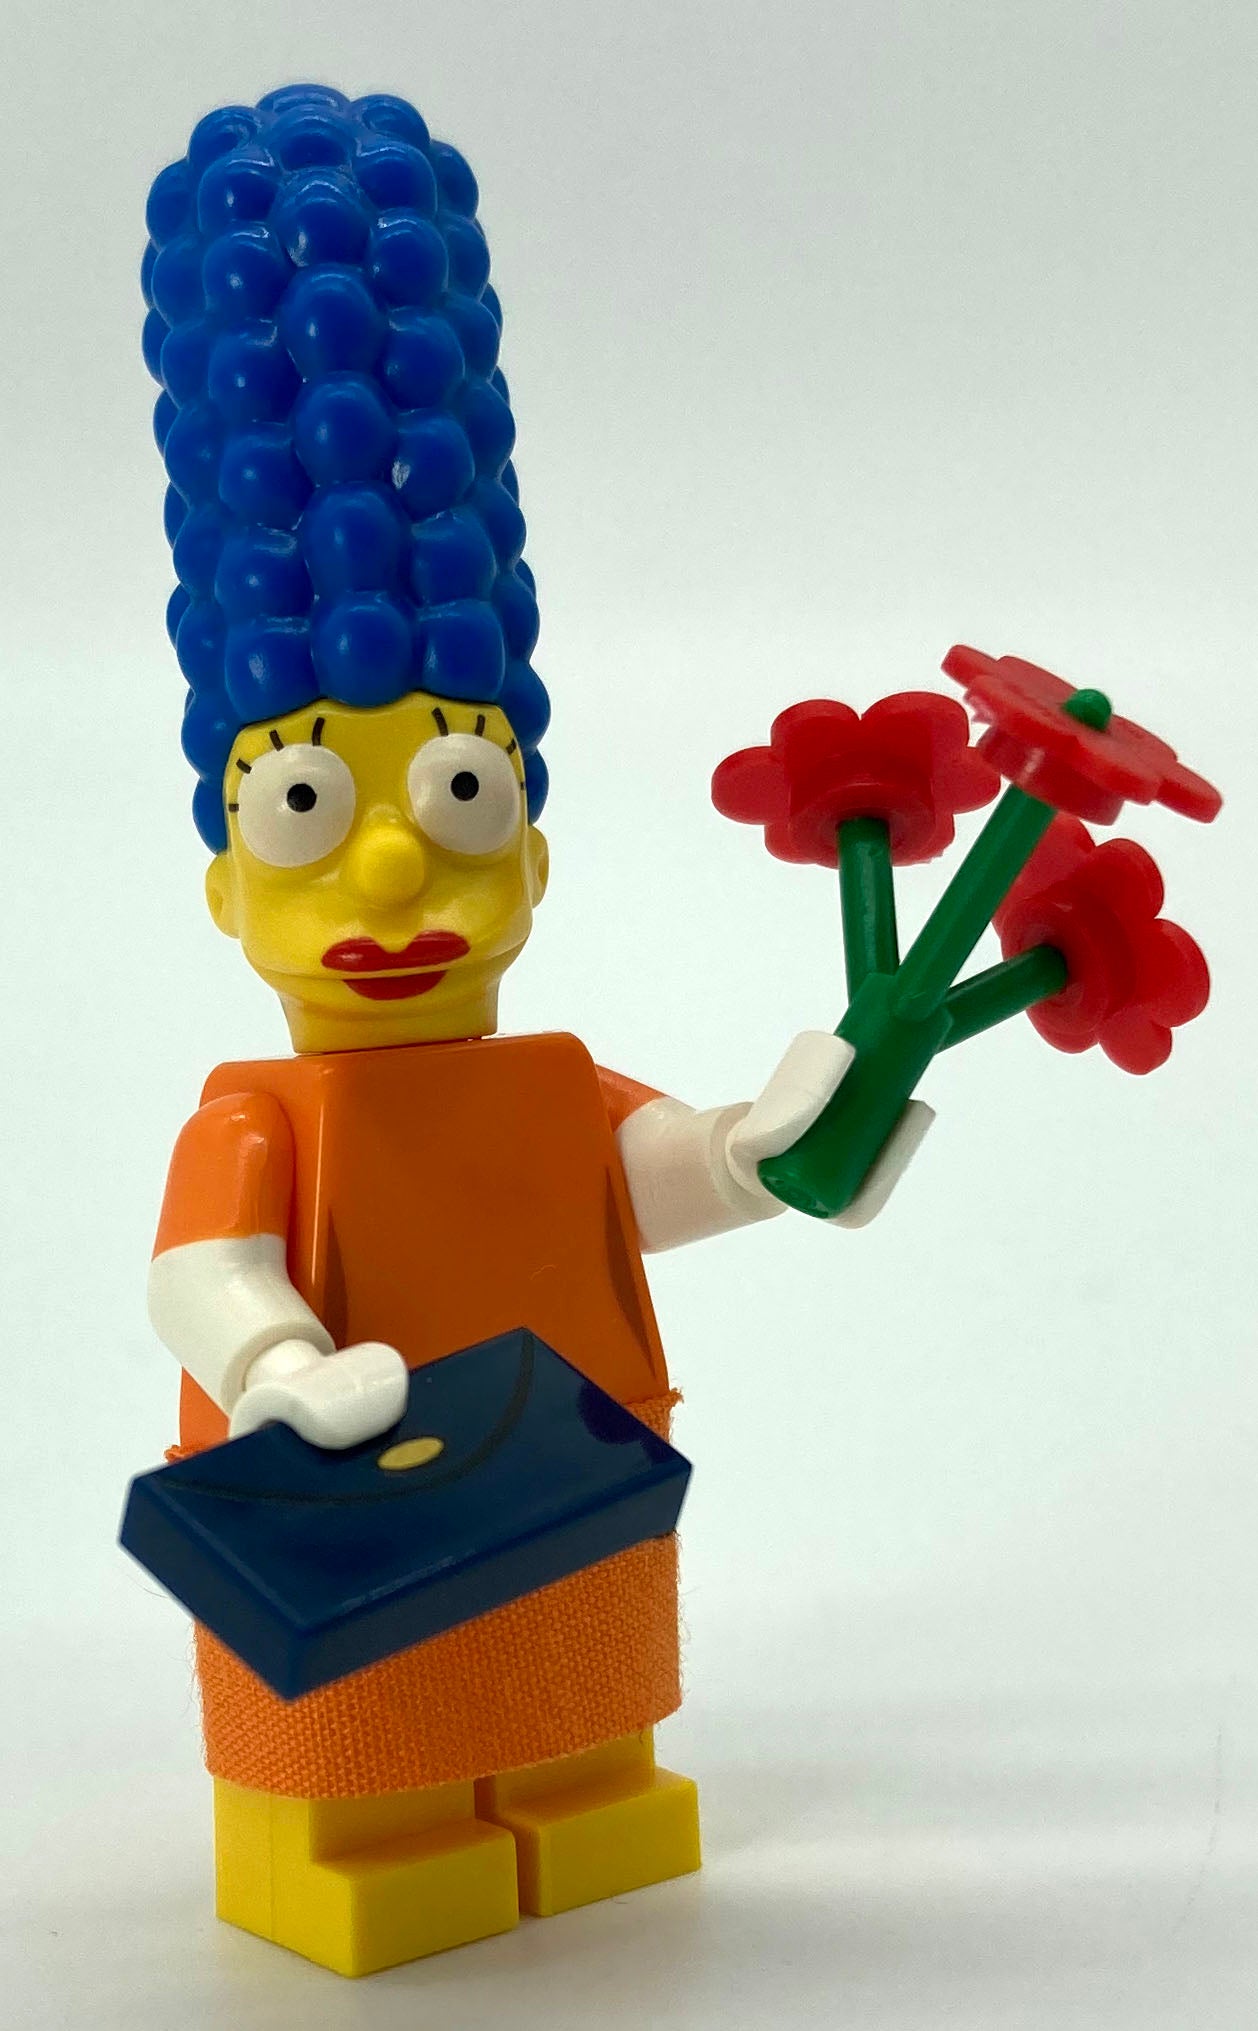 The Simpsons Series 2 - Date Night Marge